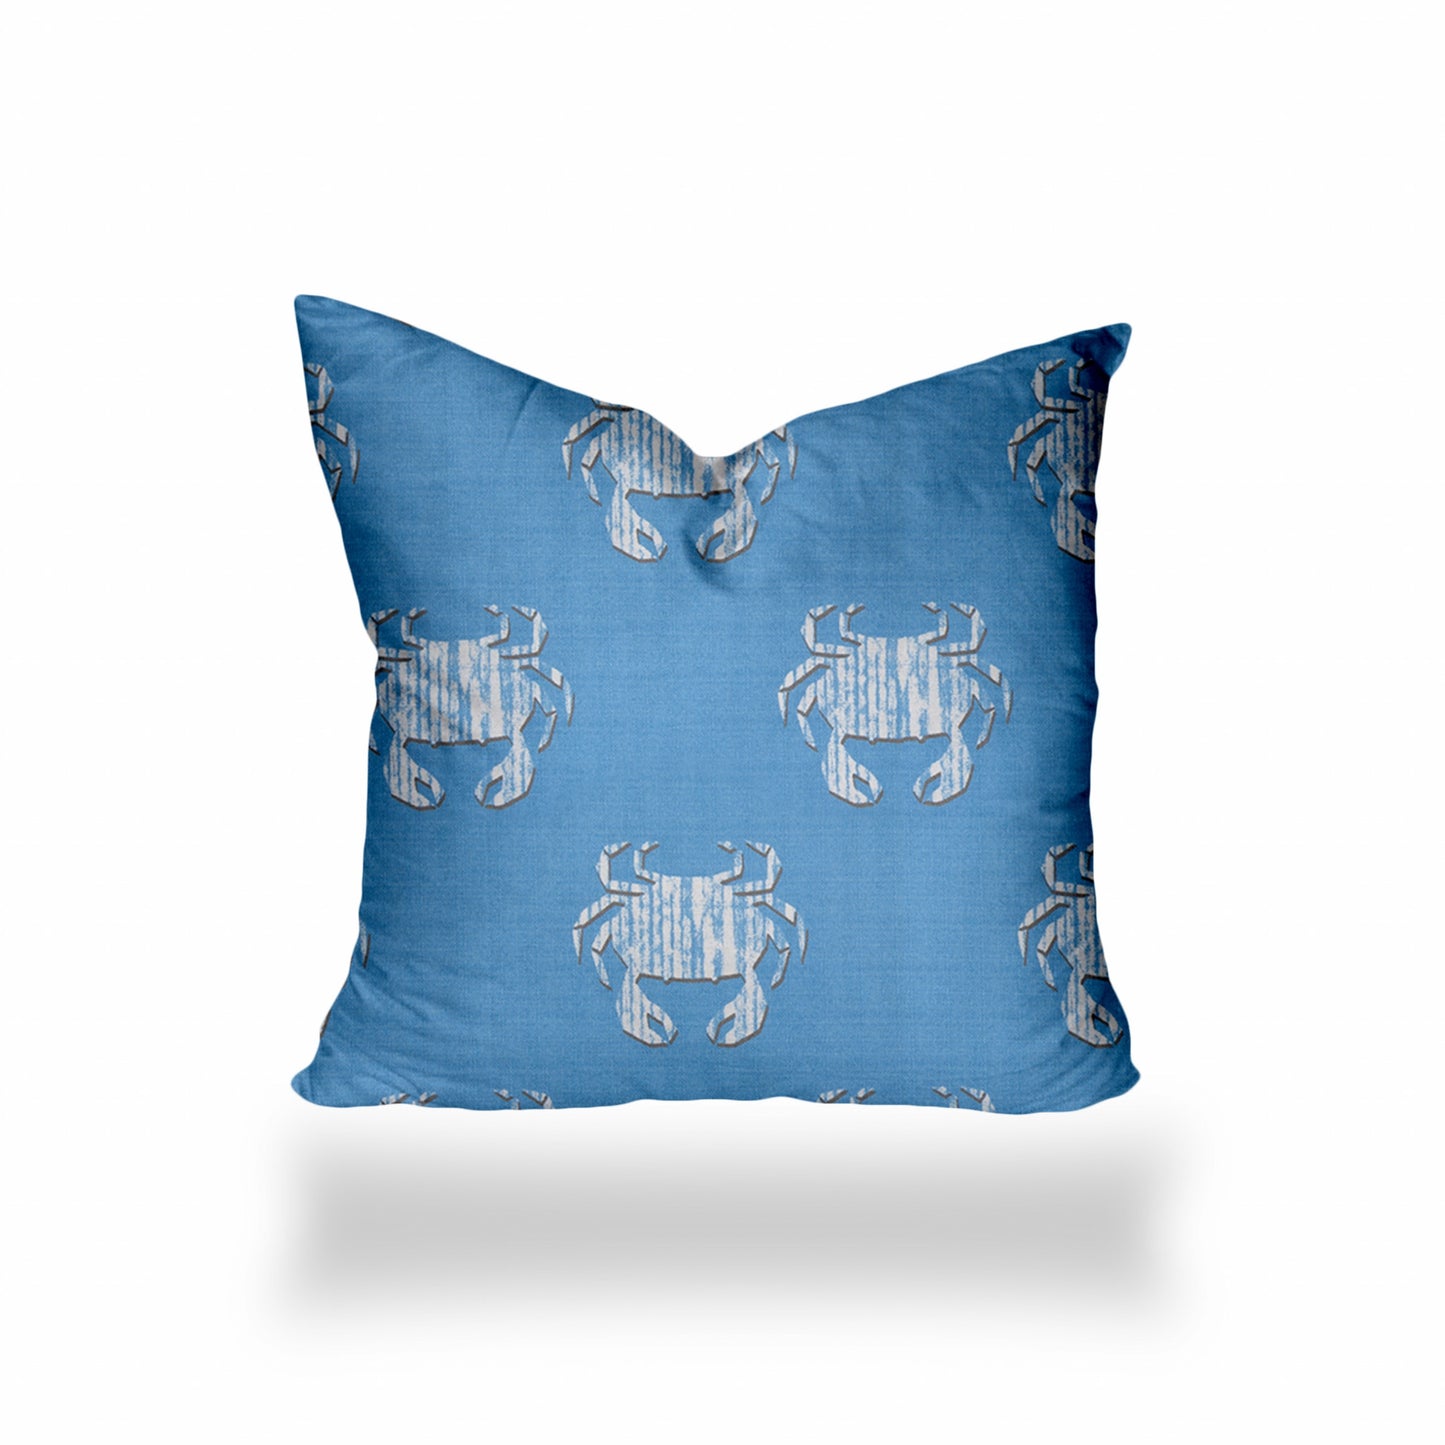 26" X 26" Blue And White Crab Zippered Coastal Throw Indoor Outdoor Pillow Cover